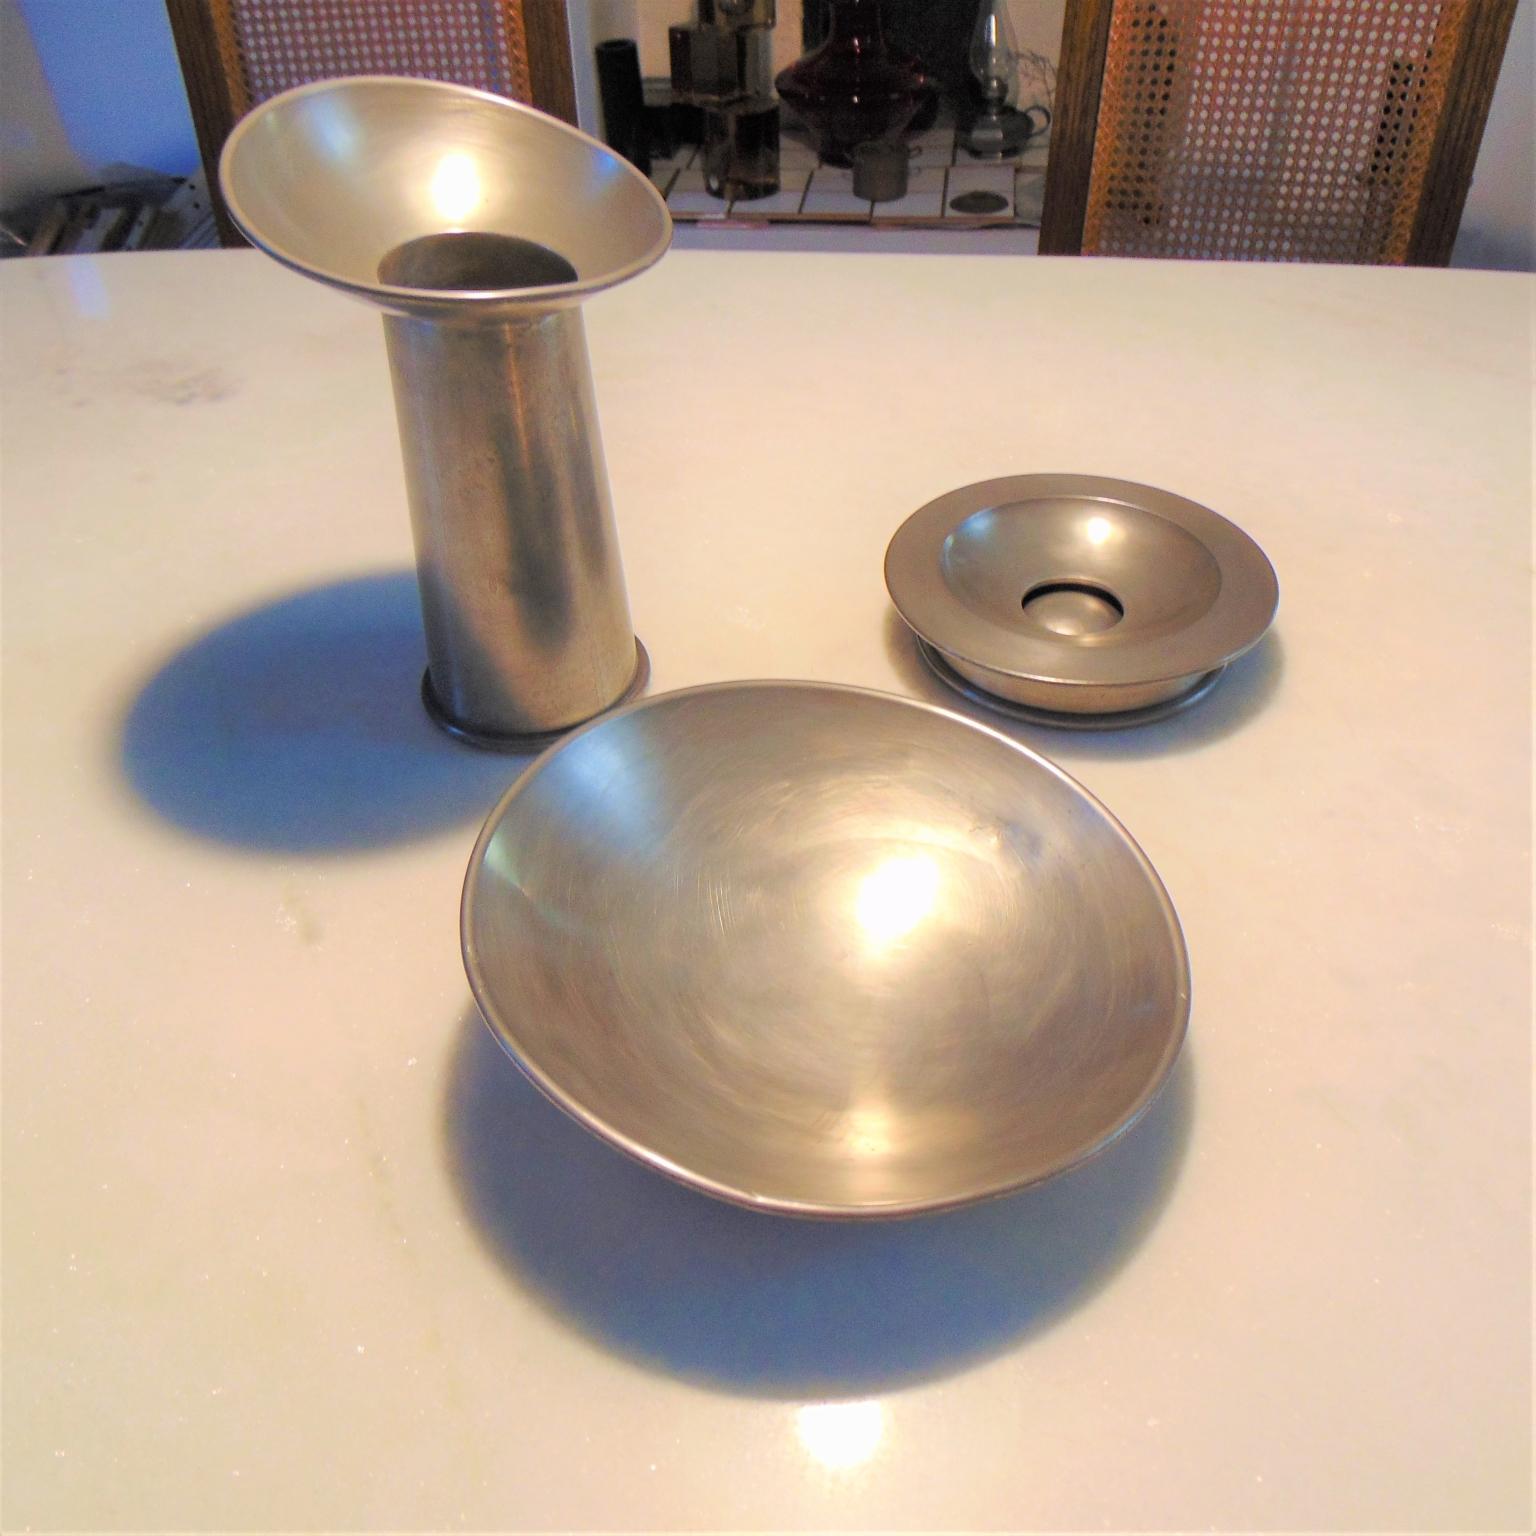 1970s Pewter Bowls and Vases by Gjlla Giani for Sormani Nucleo, Italy For Sale 11